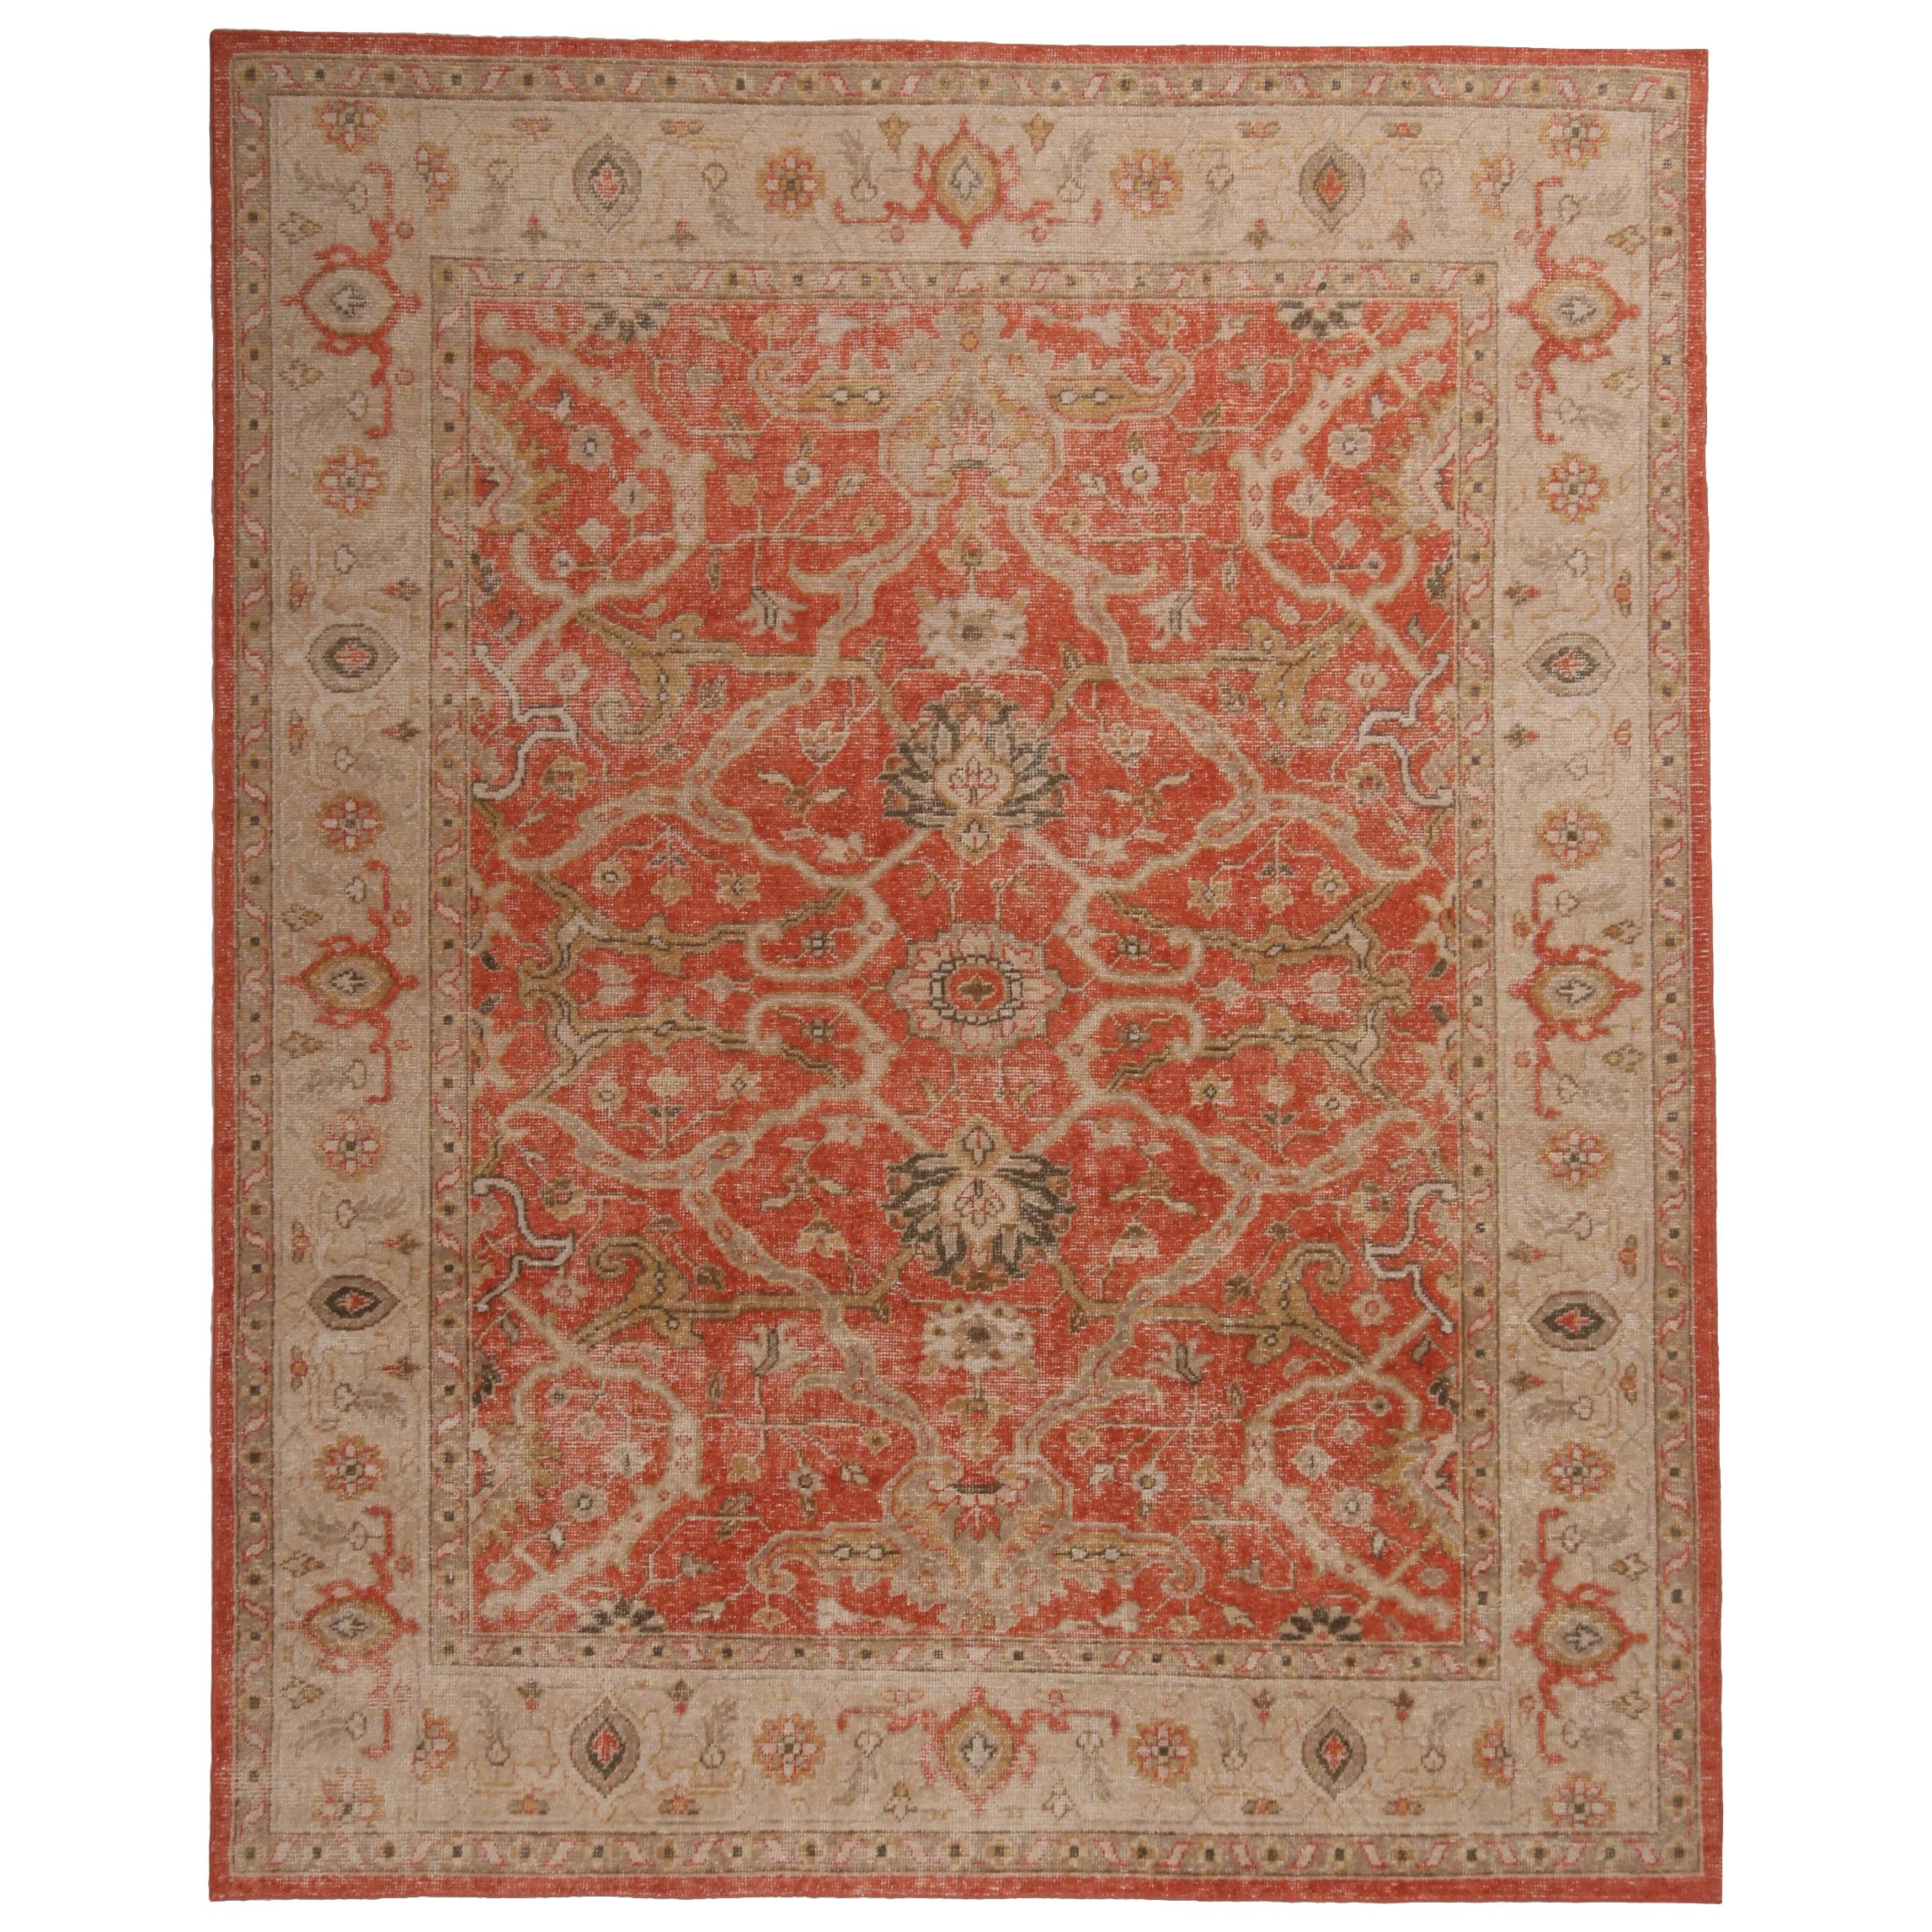 Rug & Kilim's Red Brown and Gold Wool Rug from the Homage Collection